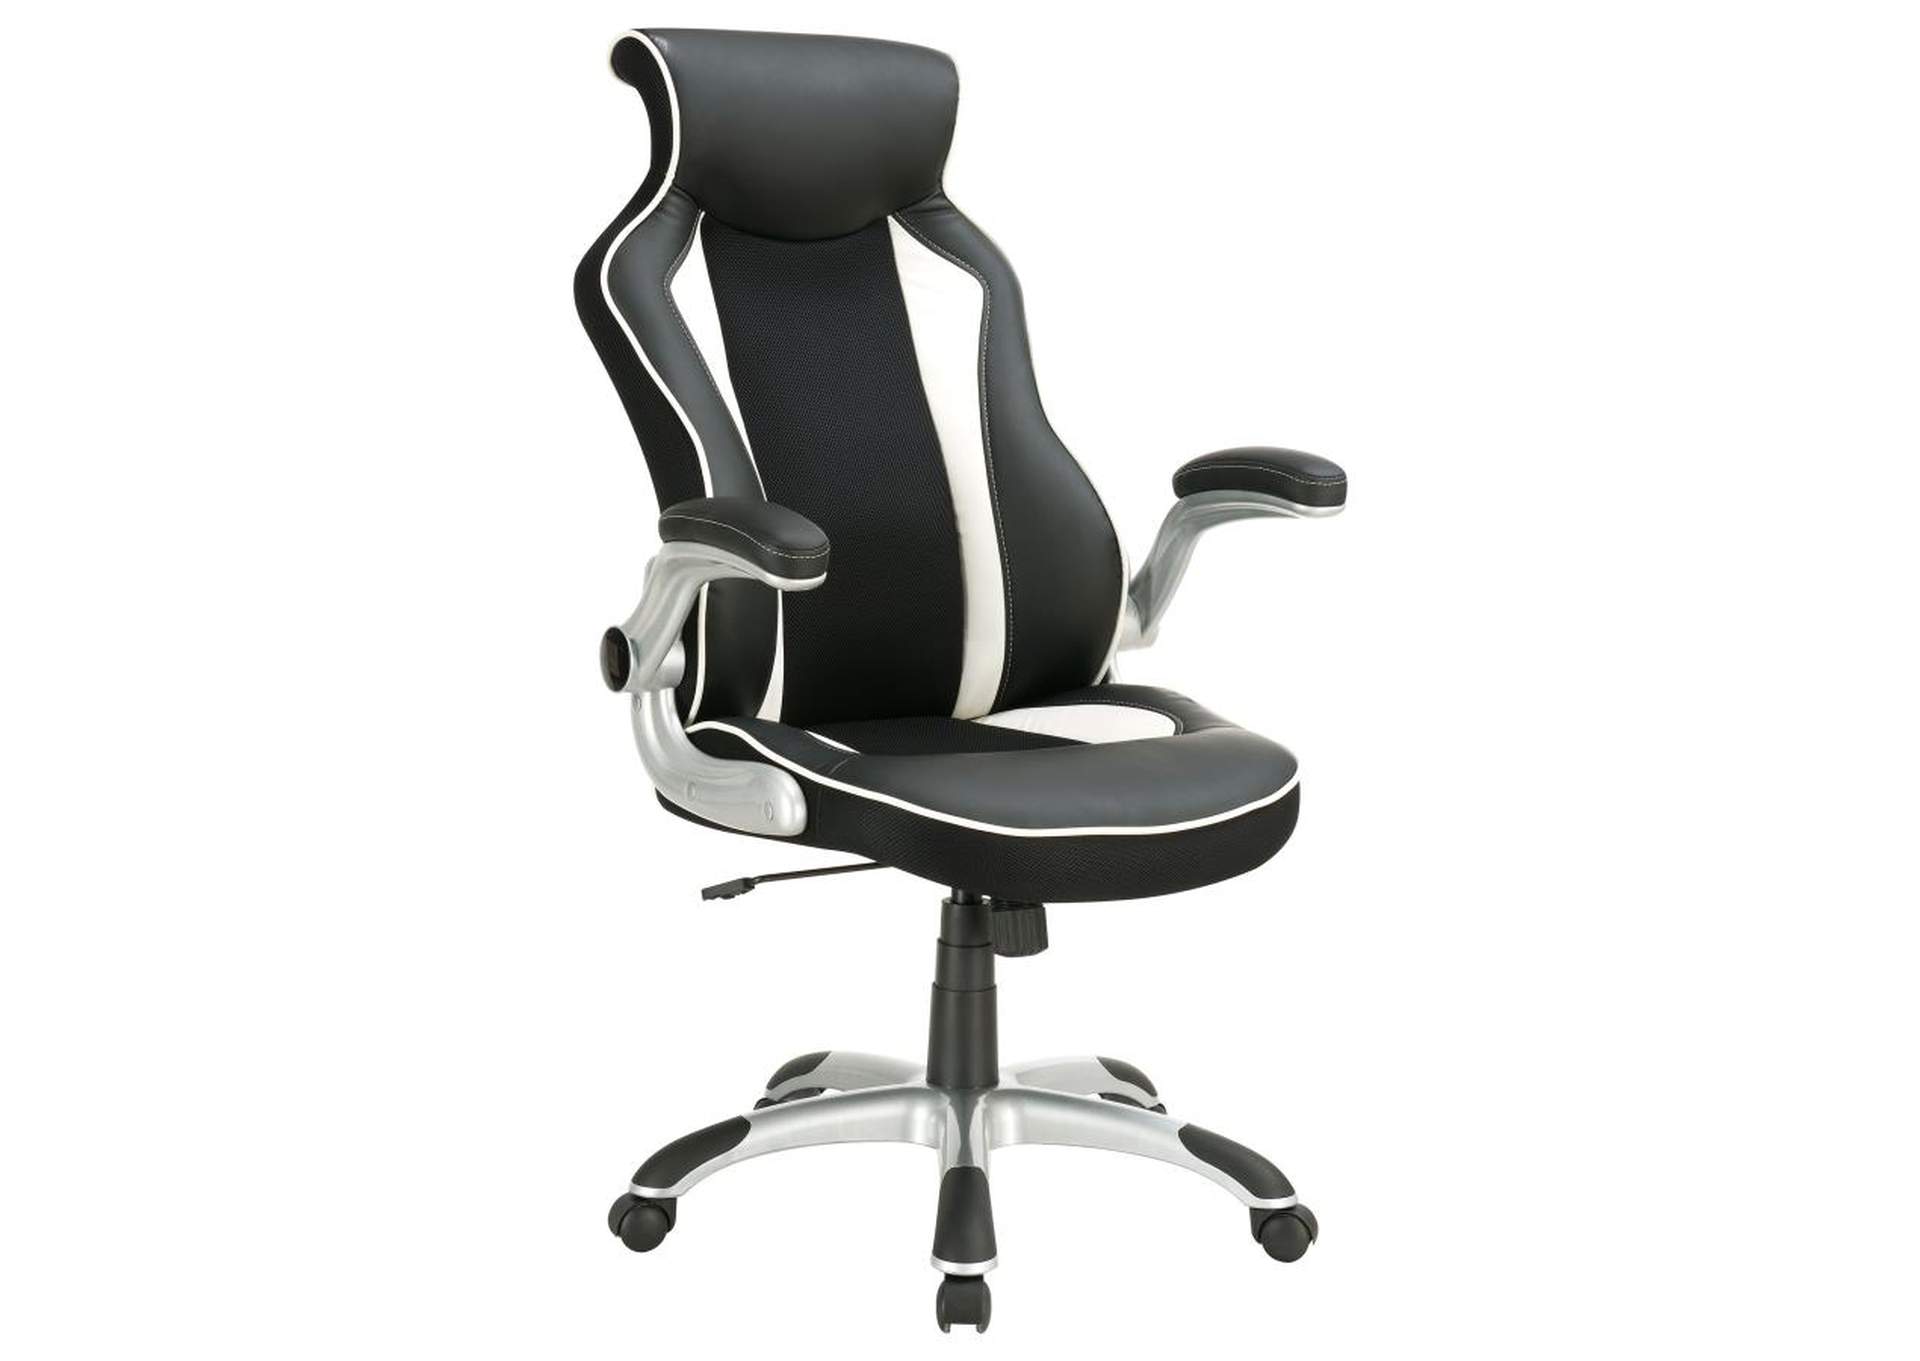 Adjustable Height Office Chair Black and Silver,Coaster Furniture